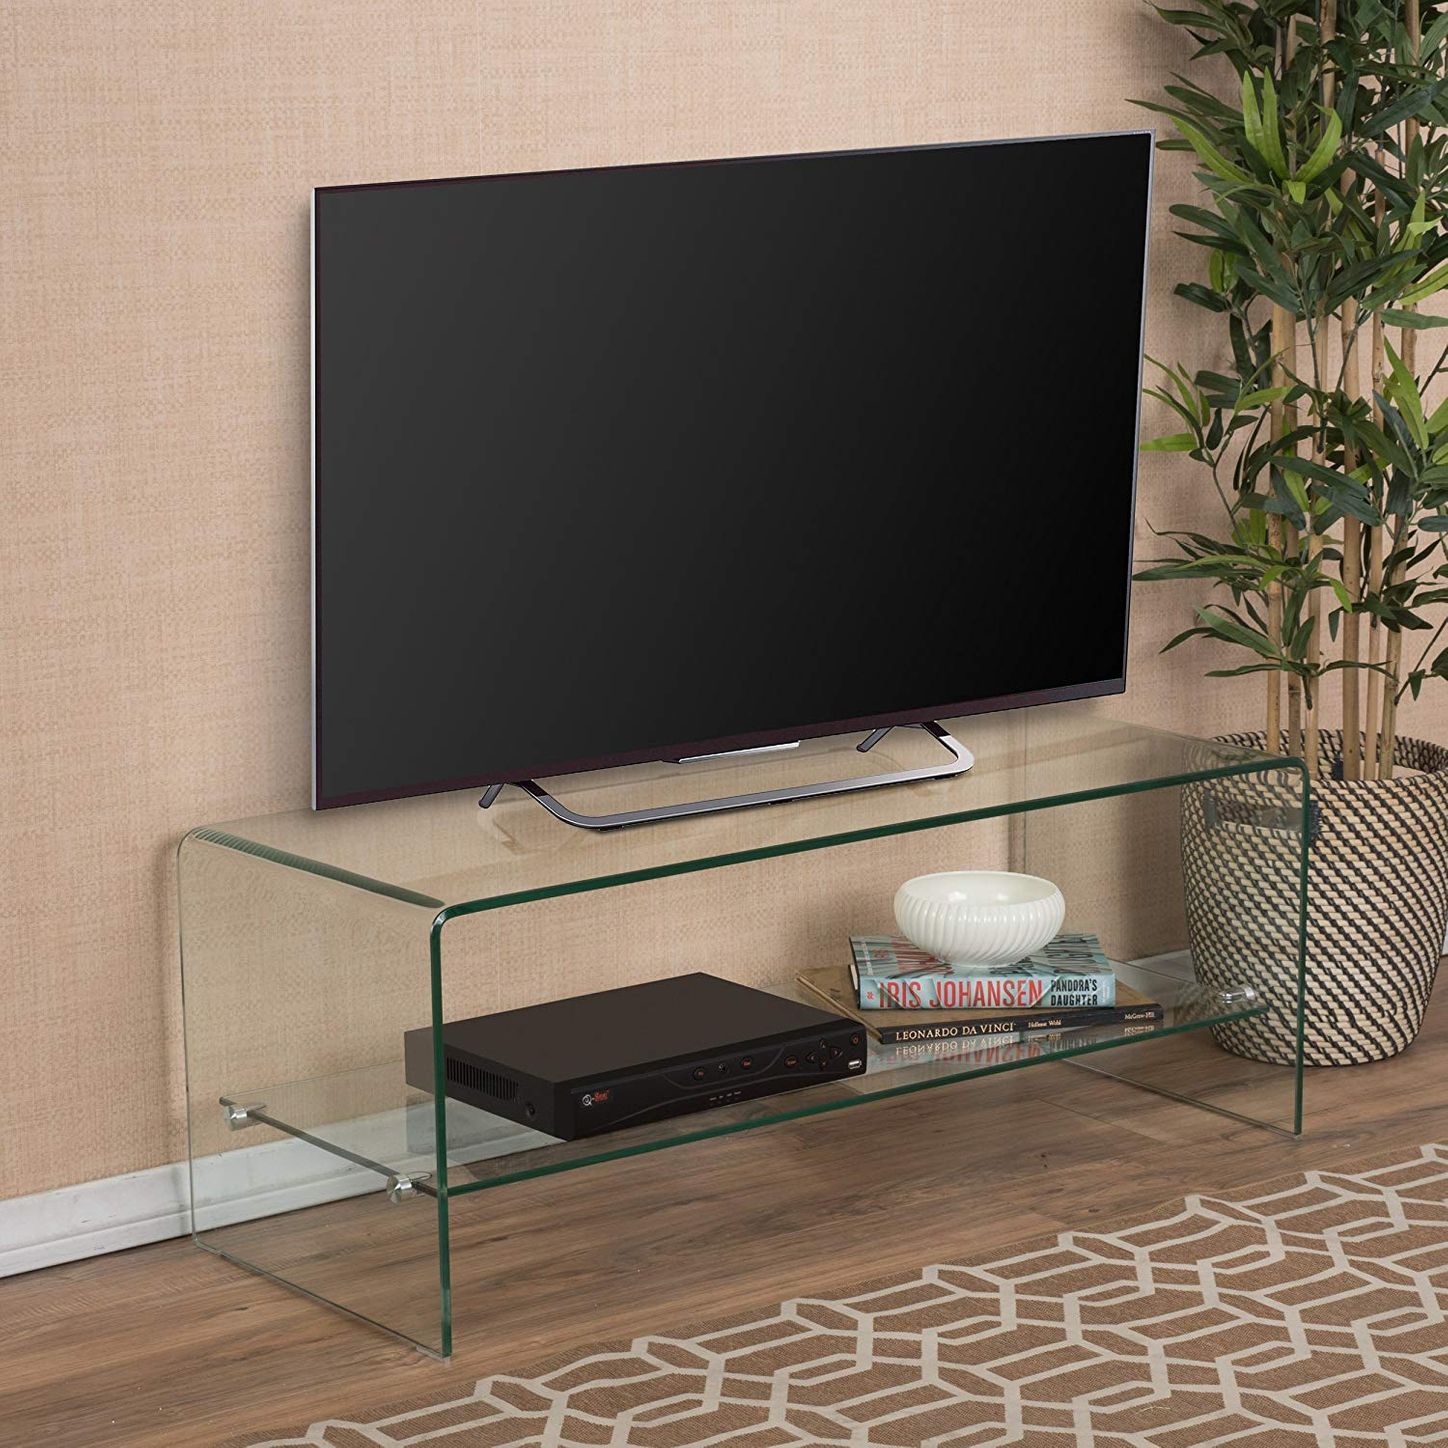 TV STAND MEDIA Table Small Entertainment Center Cabinet Black Glass TVs to 25" 